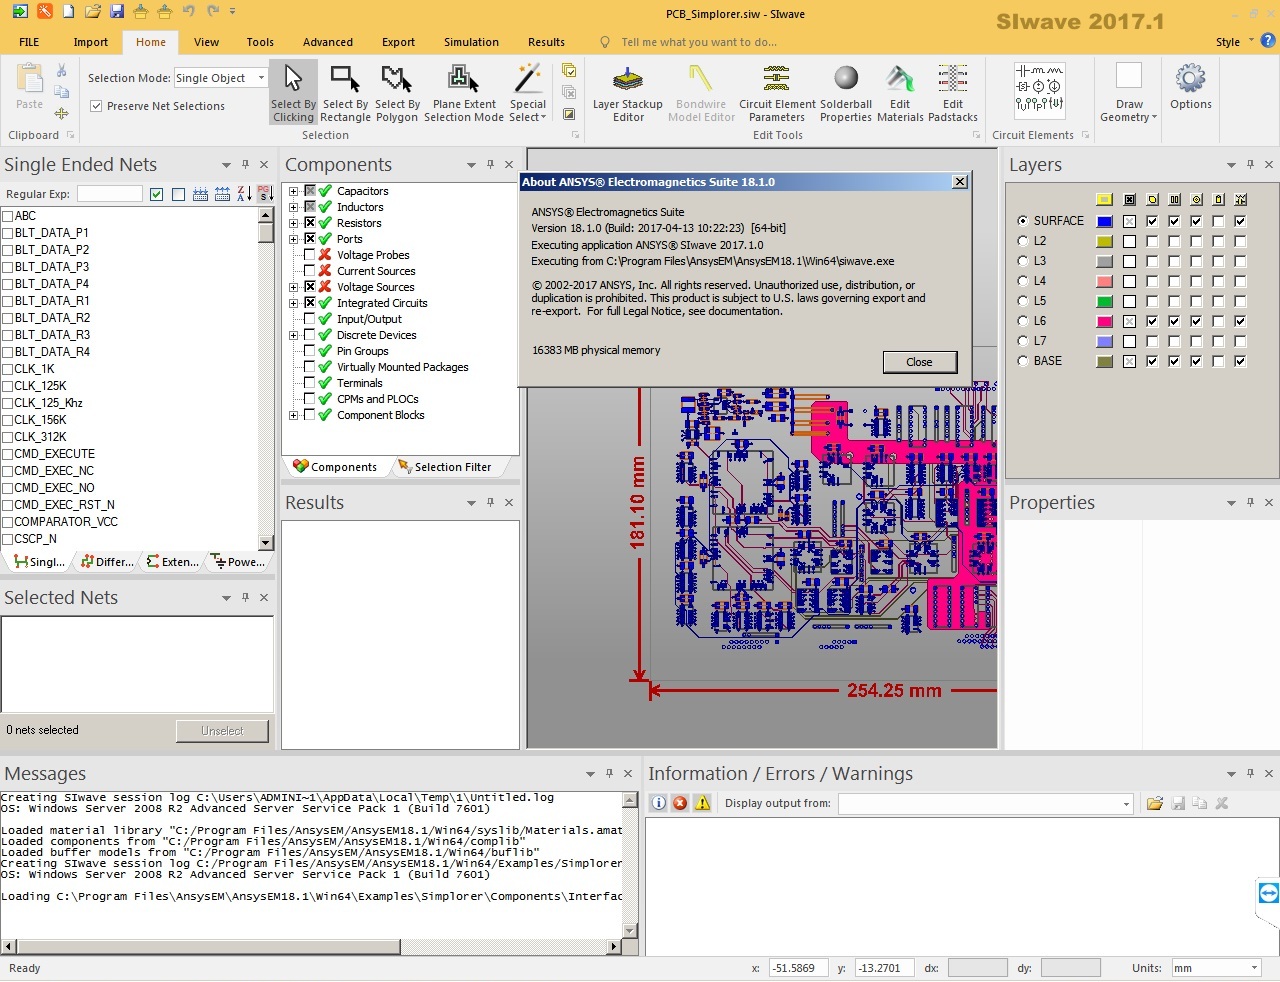 Working with ANSYS Electronics 18.1 Suite win64 full